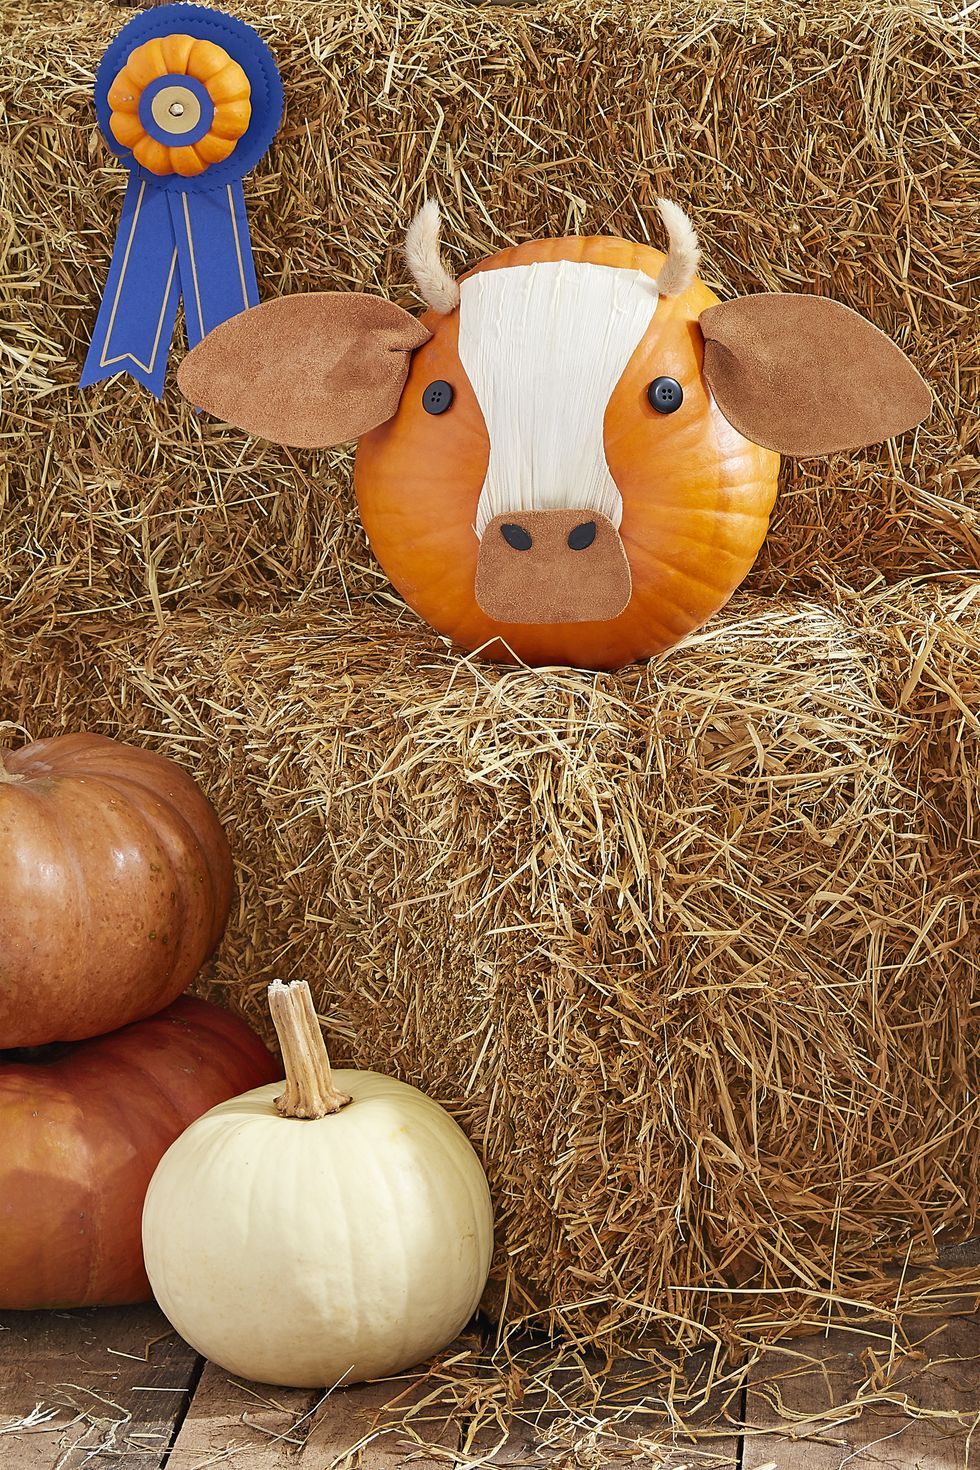 pumpkin faces, pumpkin carved to look like a cow with black button eyes